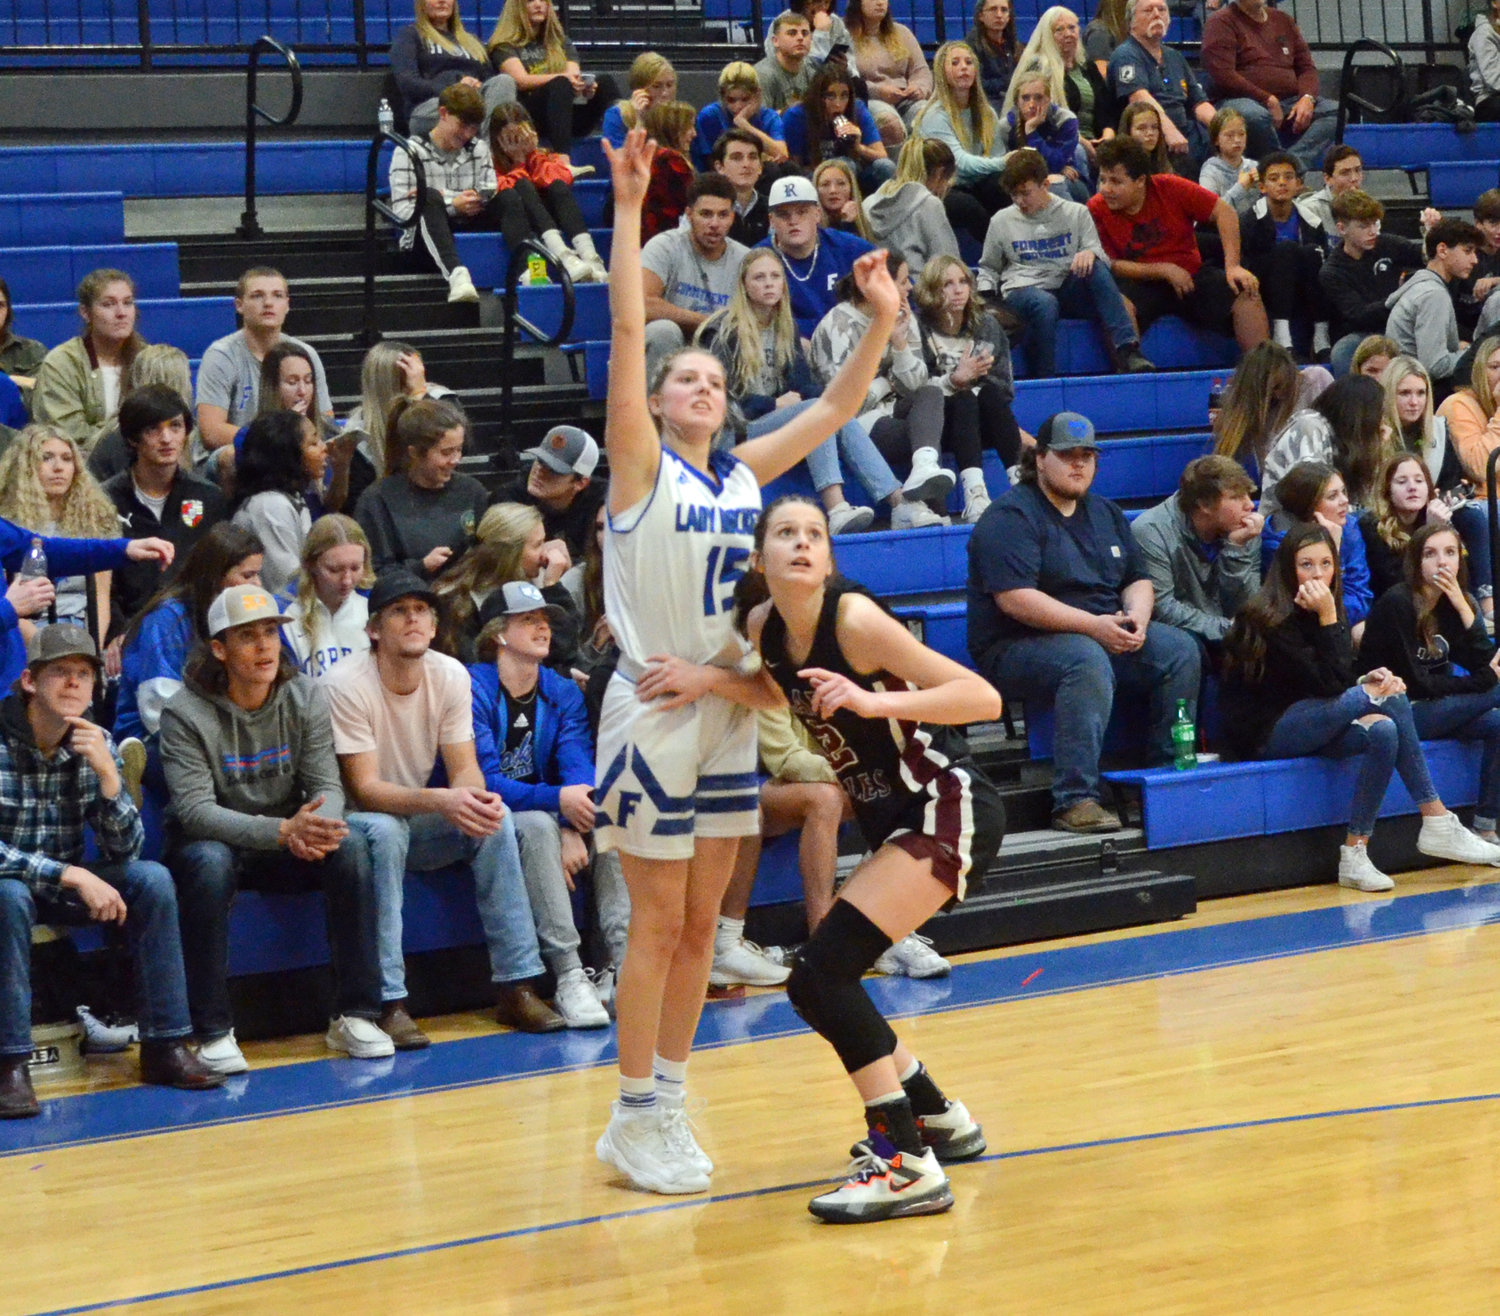 Forrest’s Megan Mealer drains one of her two fourth quarter 3-pointers in the Lady Rockets’ 51-36 loss to Eagleville Tuesday night at Chapel Hill.